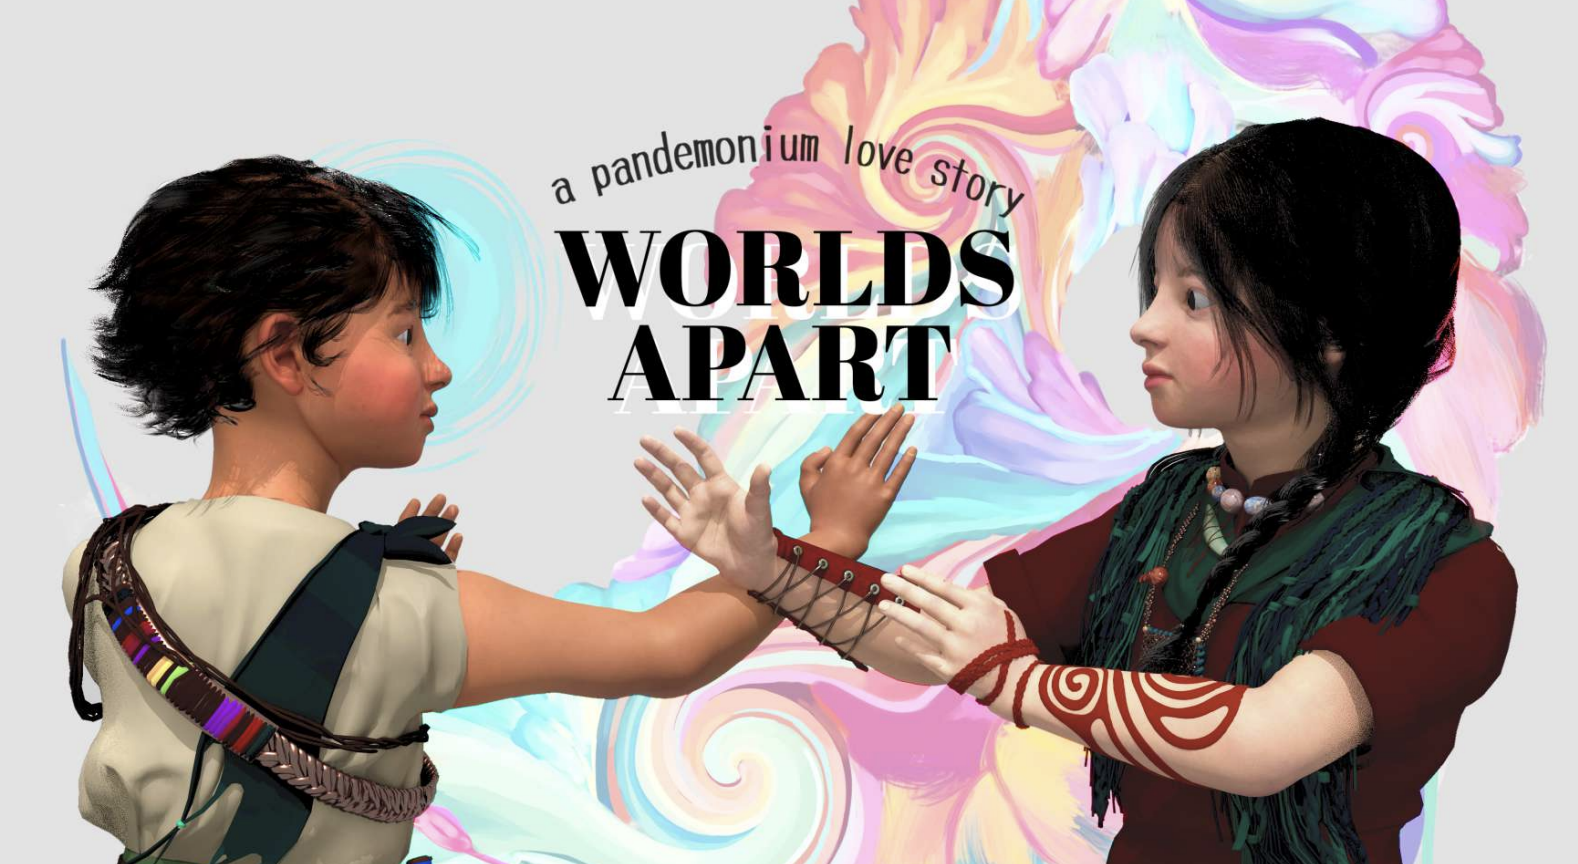 THE ART OF “WORLDS APART”